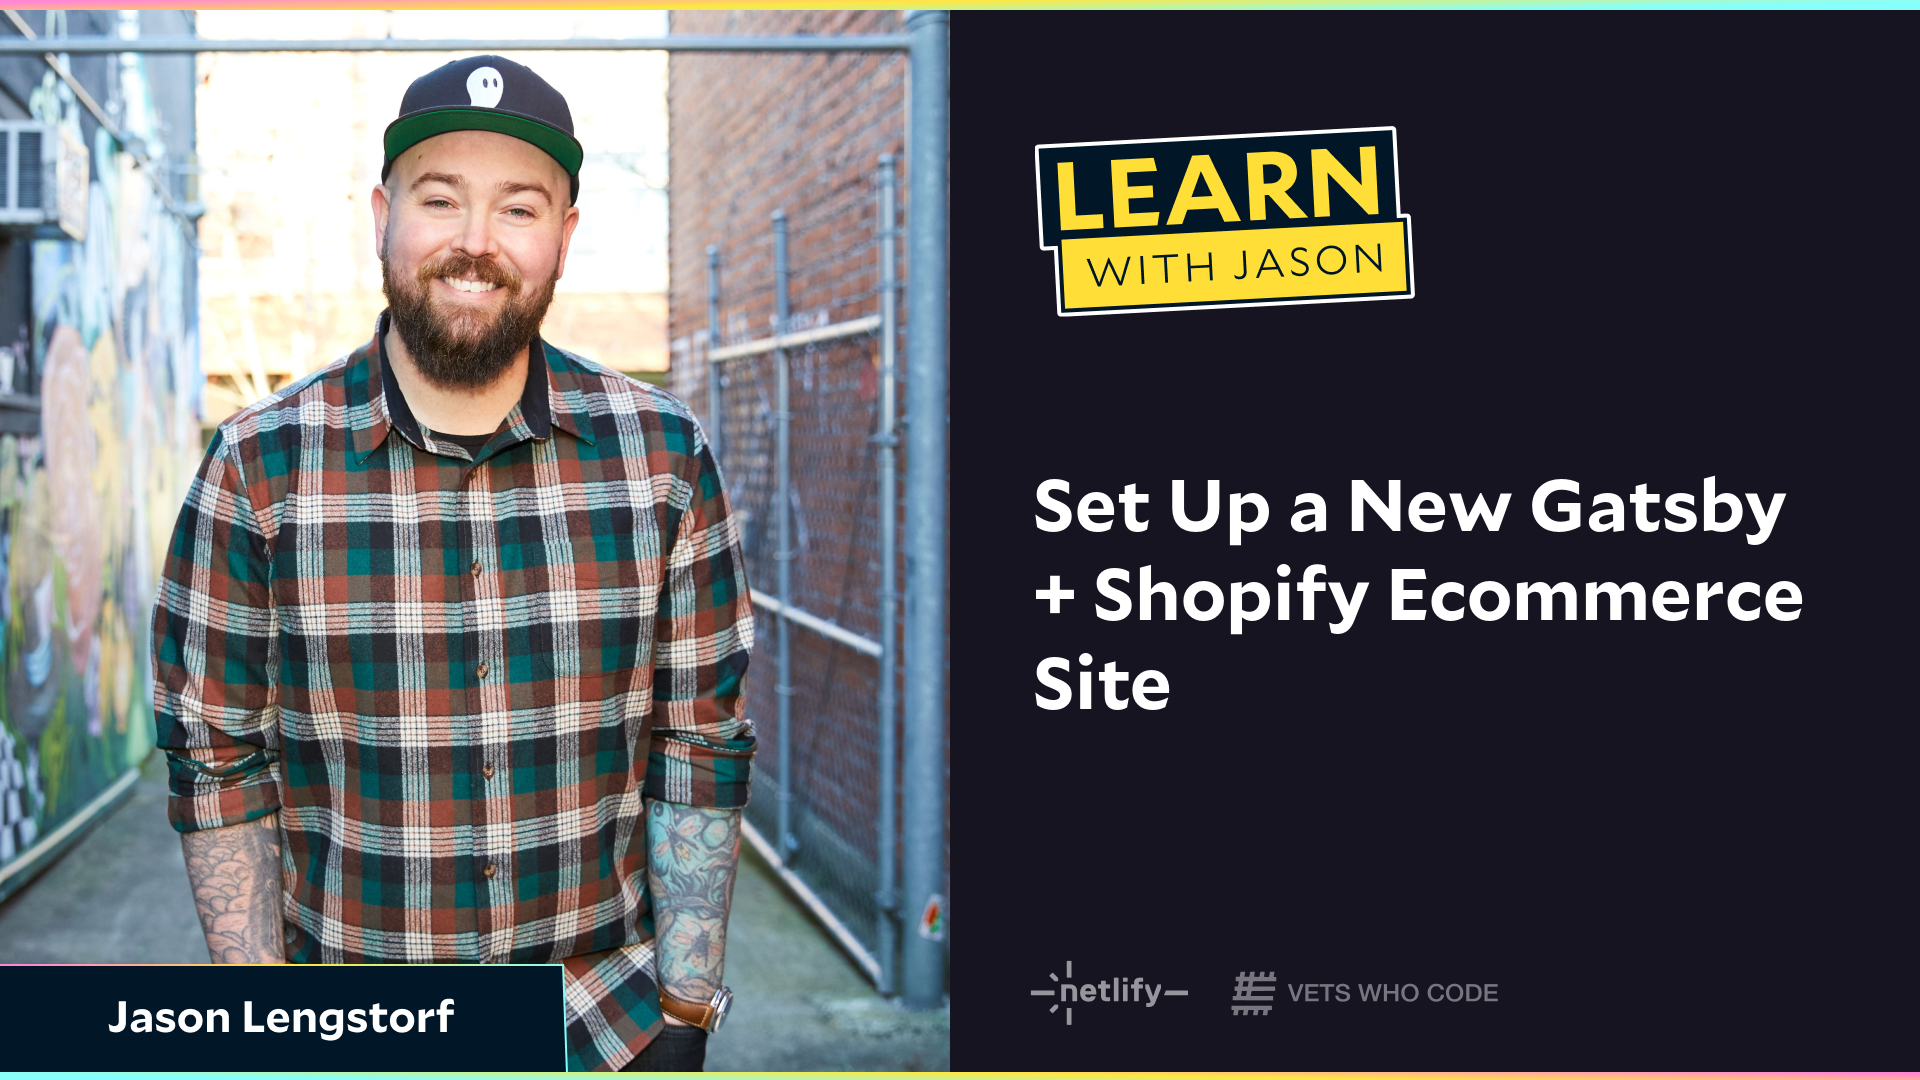 Set Up a New Gatsby + Shopify Ecommerce Site (with Jason Lengstorf)